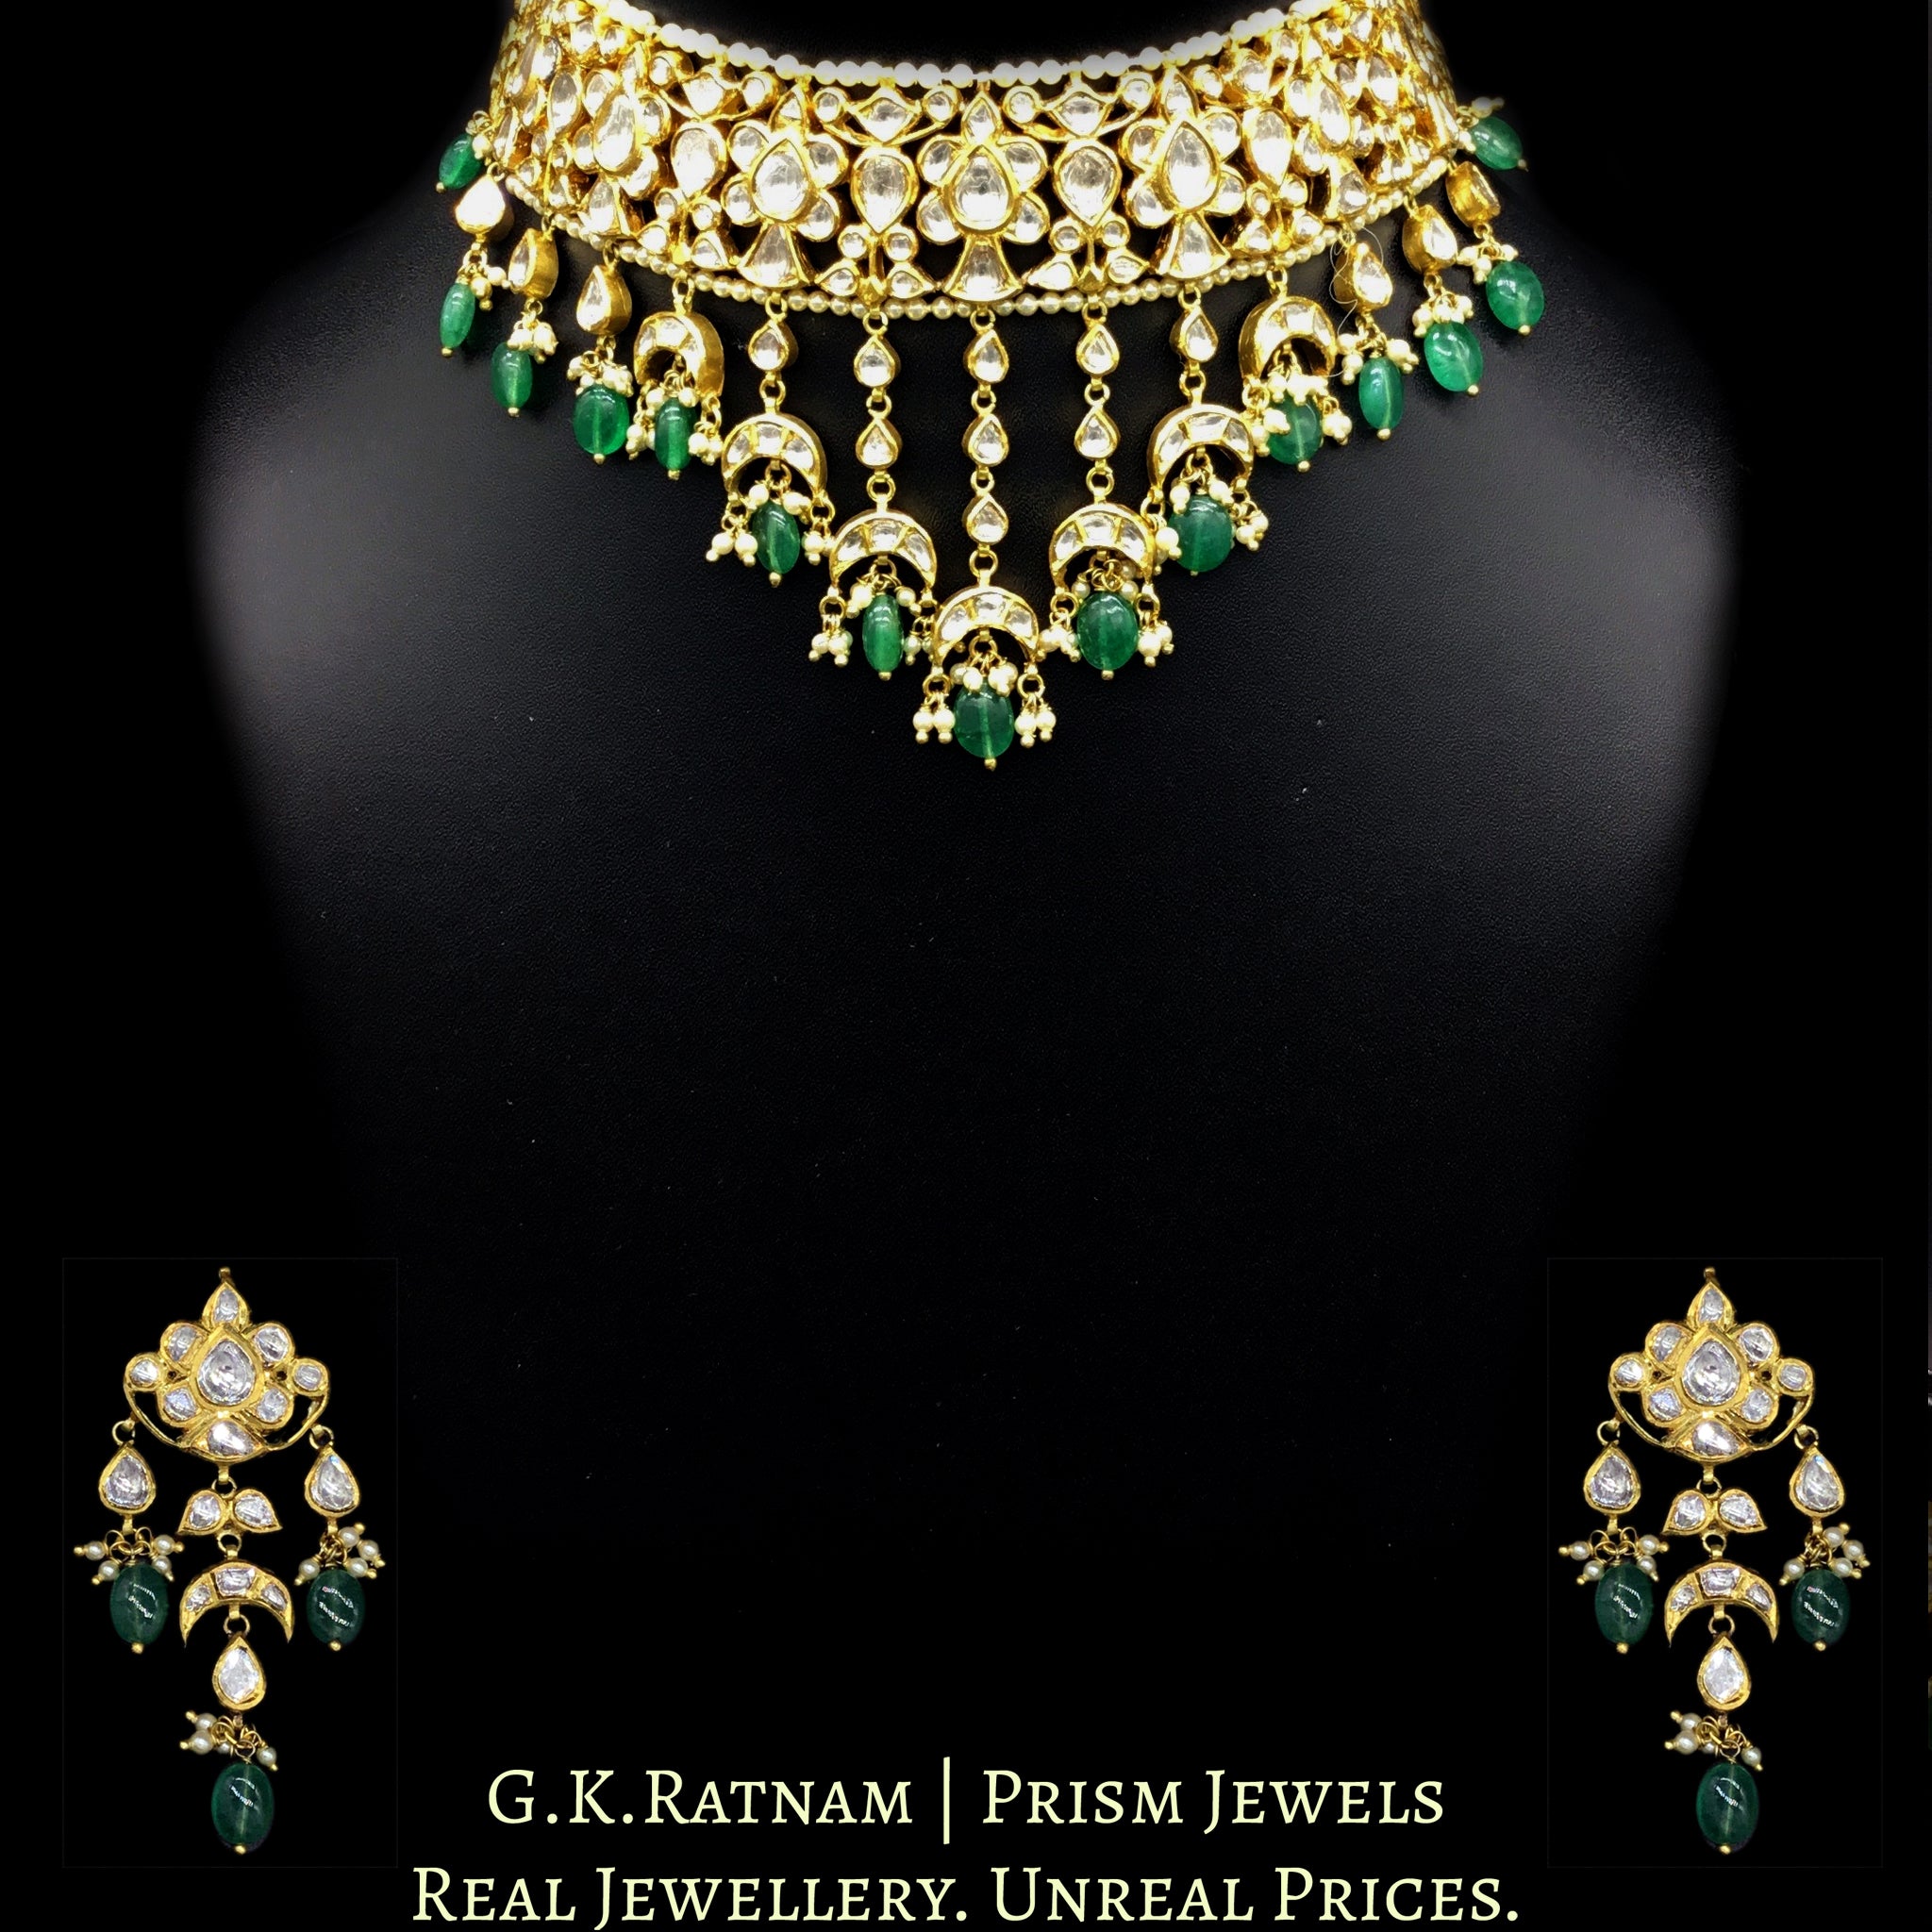 18k Gold and Diamond Polki Choker Necklace Set with cascading uncut pears and lustrous green beryls